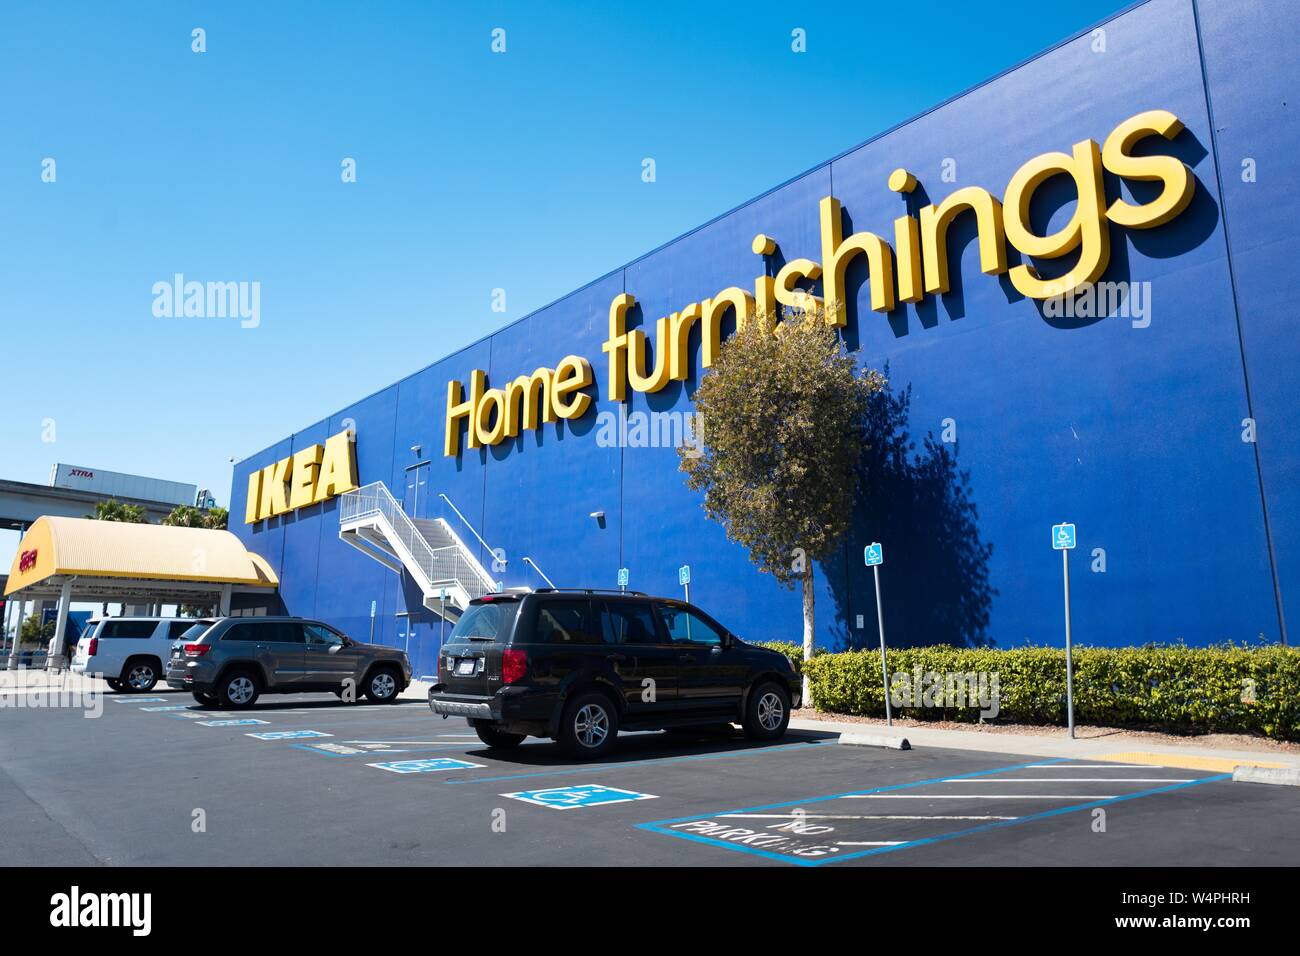 Facade with logo visible at the IKEA Home Furnishings store in downtown  Emeryville, California, with cars parked in front, September 18, 2018 Stock  Photo - Alamy